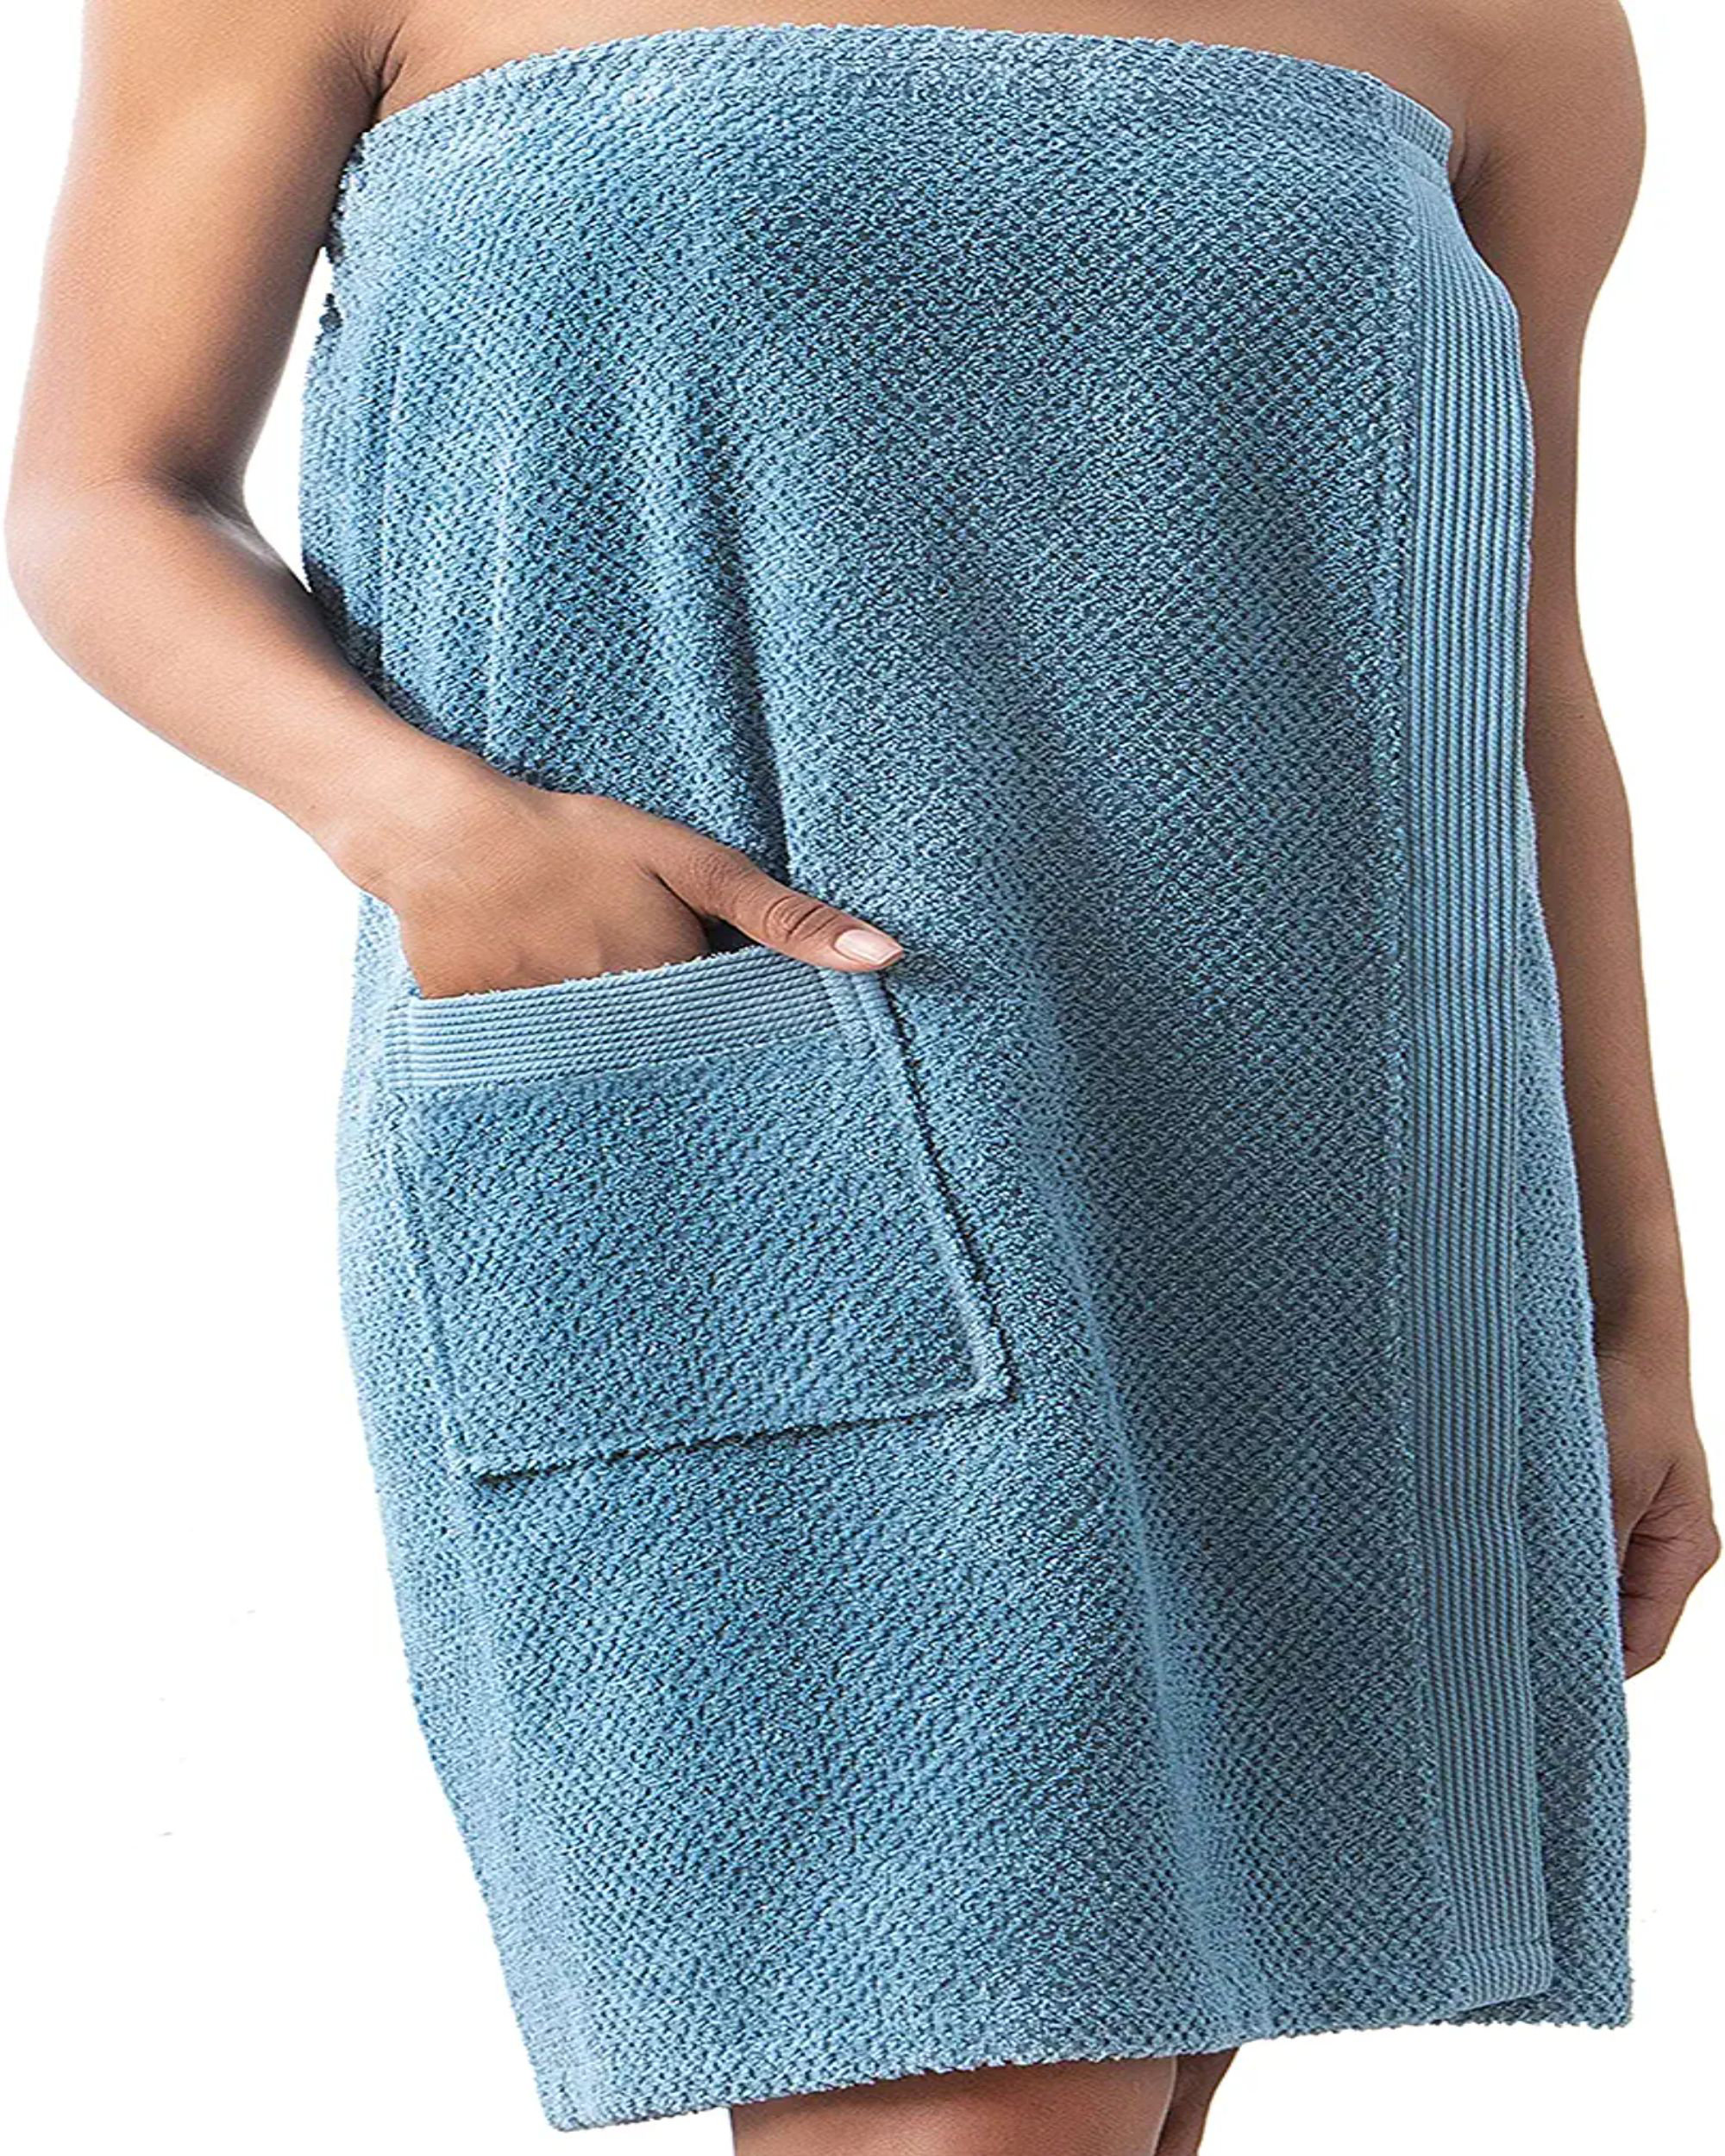 Personalized Passion Personalized Spa Towel Wrap For Women- Soft &  Absorbent Waffle Body Wrap- Custom Bath Wrap Towels With Embroidered Name